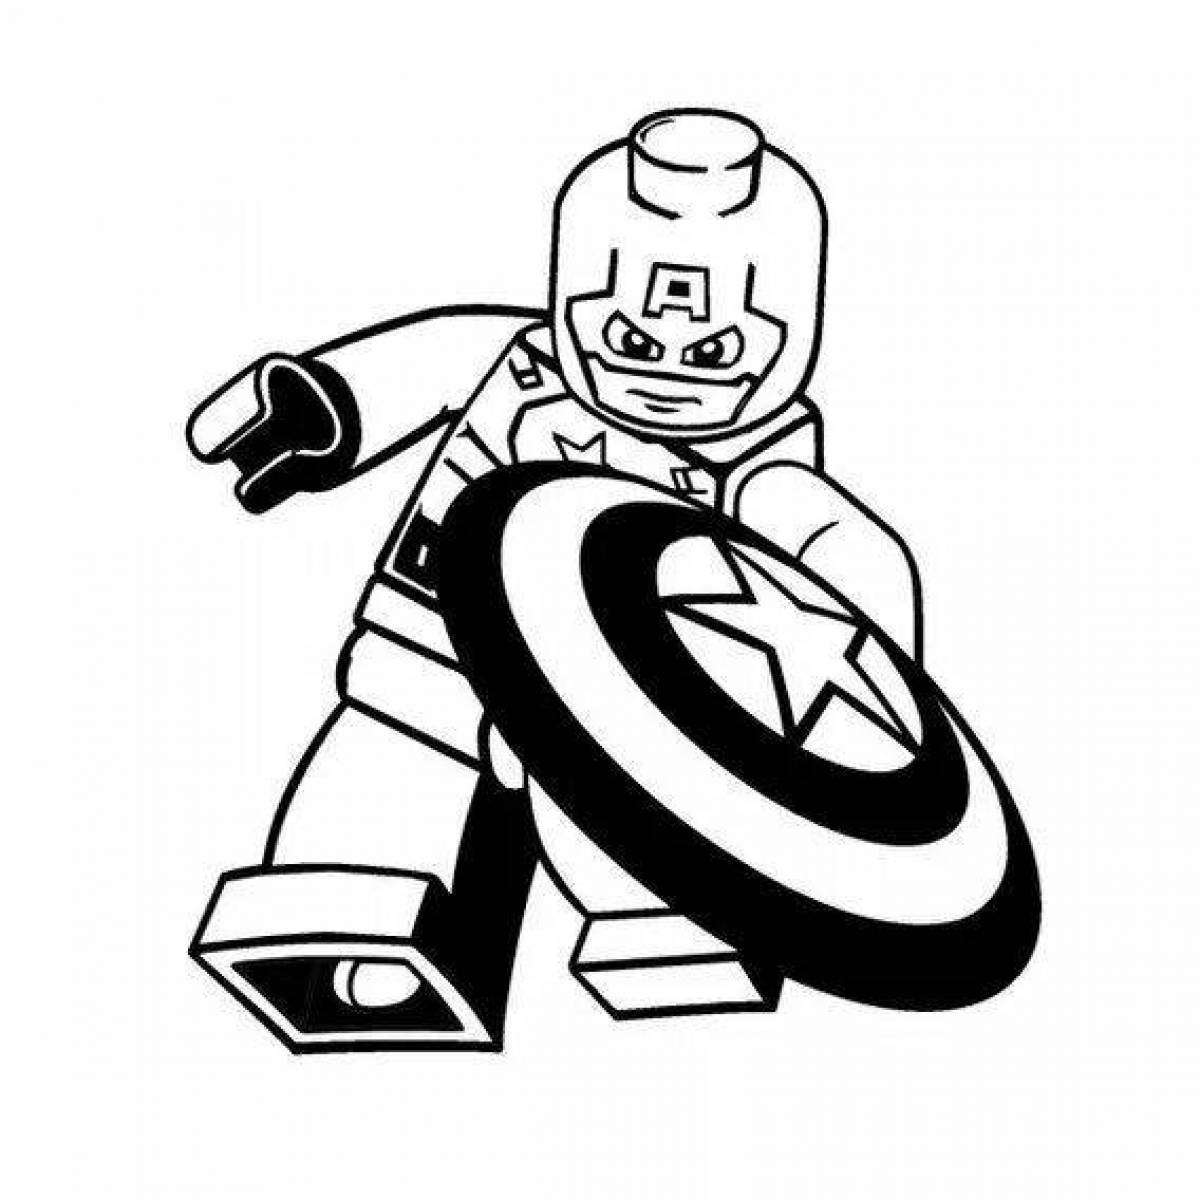 Sweet lego captain america coloring book